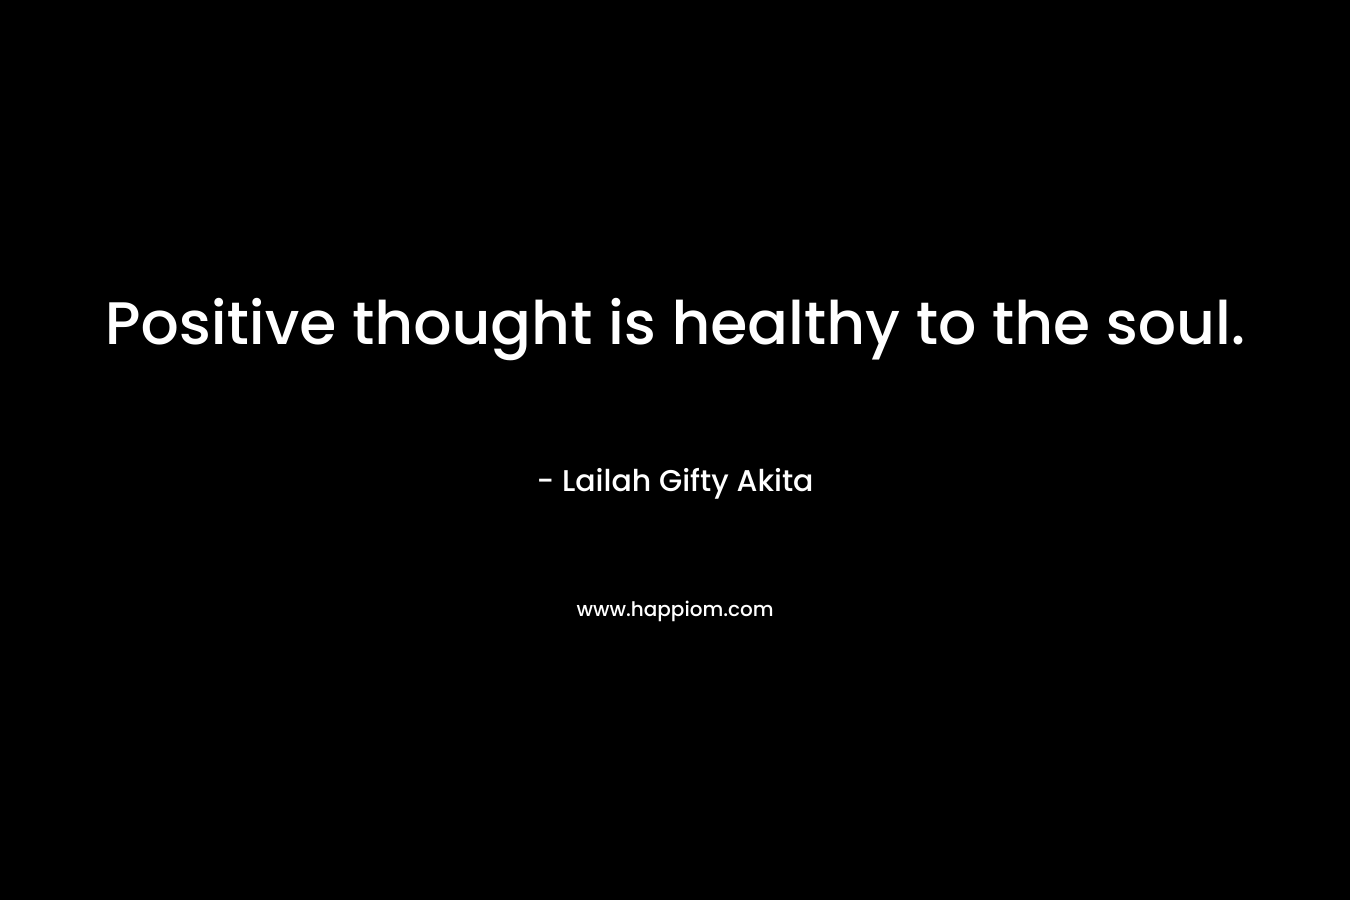 Positive thought is healthy to the soul.